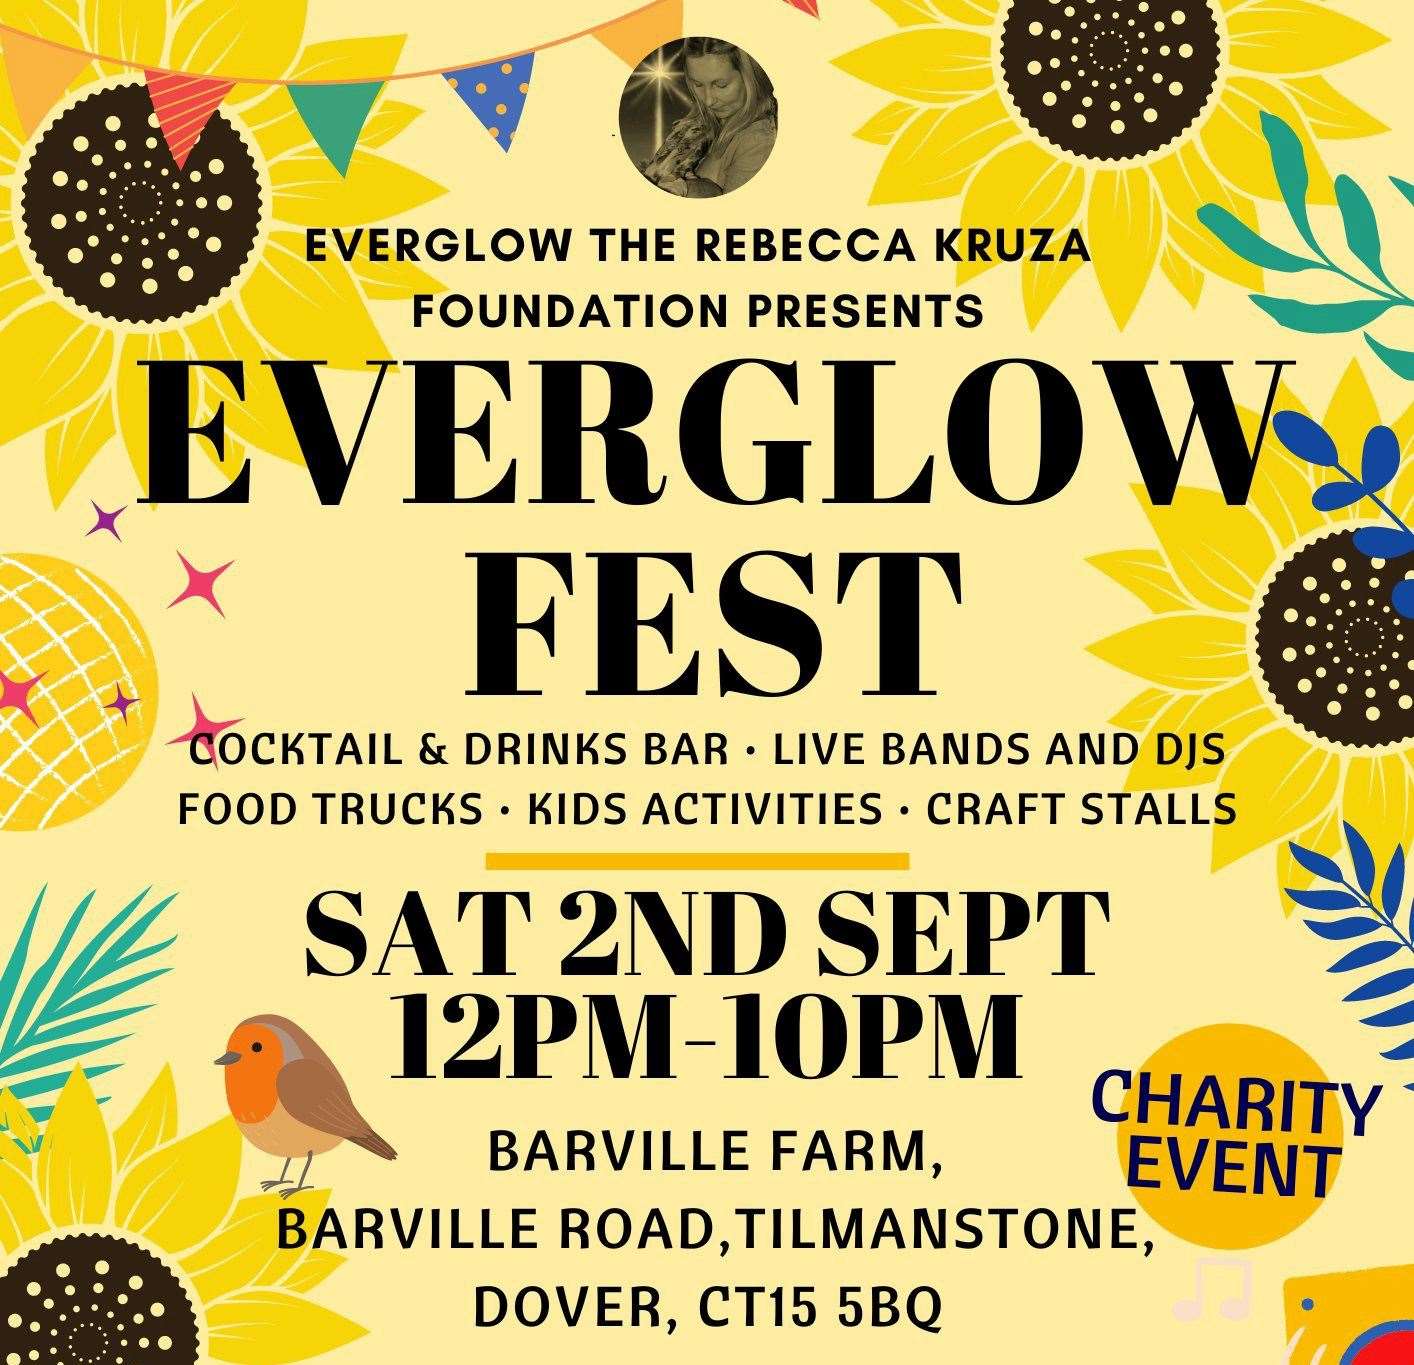 Everglow Fest is to be held in memory of Rebecca Kruza